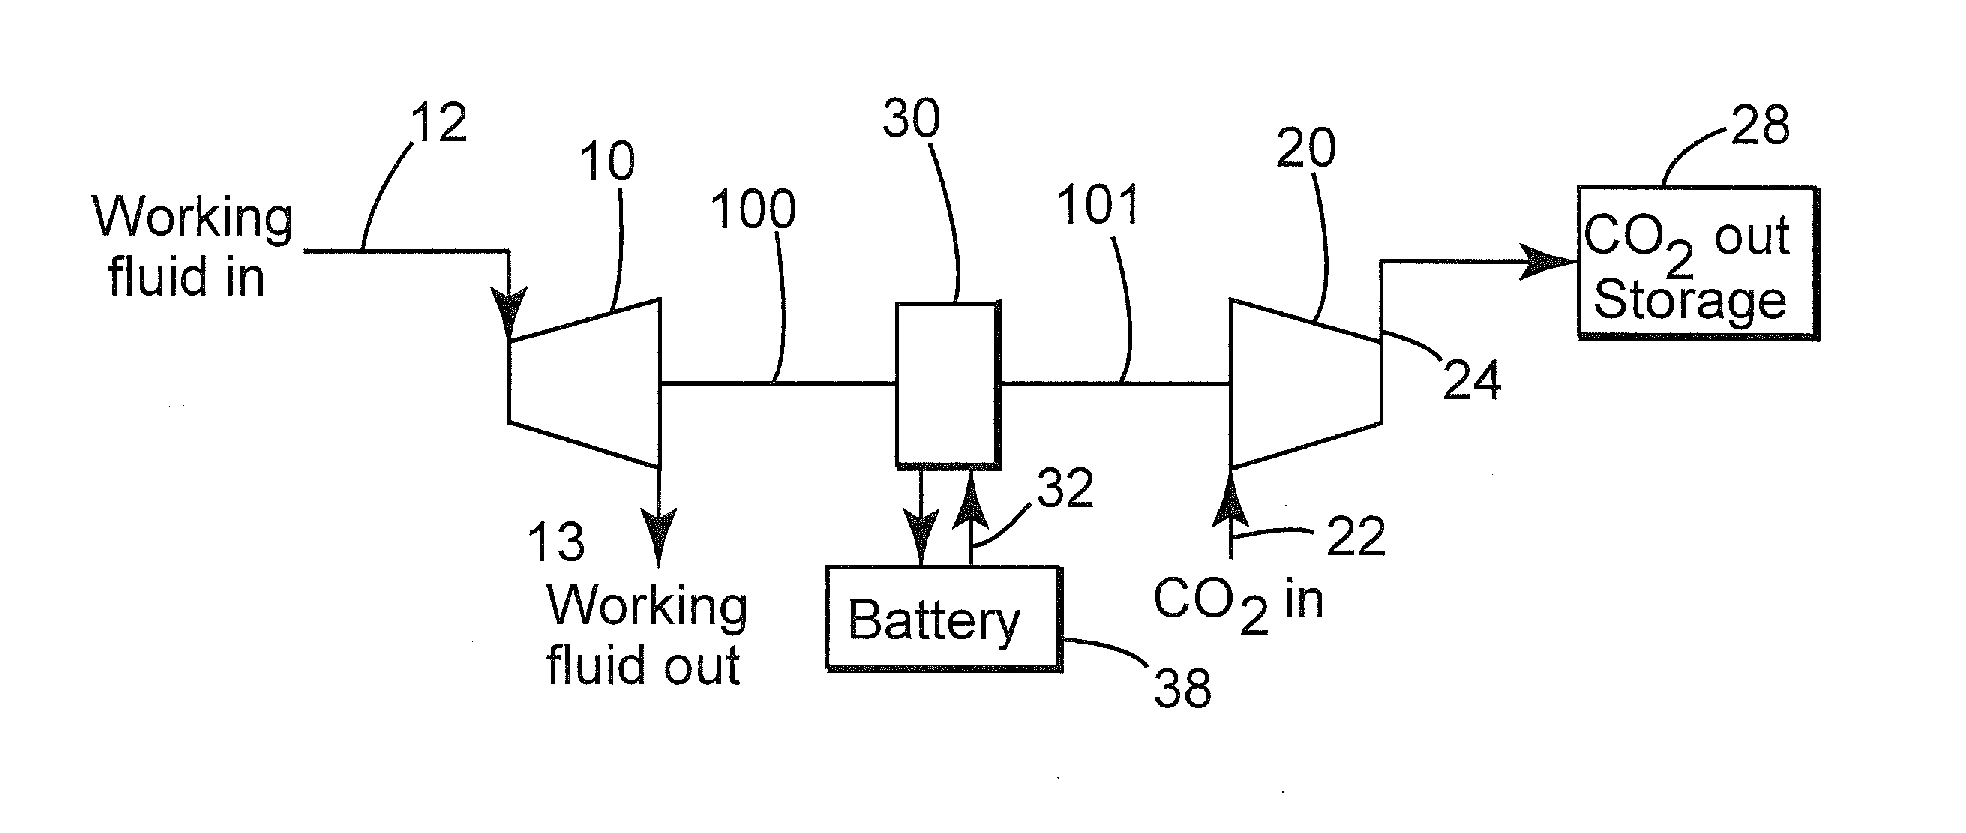 Integrated method of driving a co2 compressor of a co2-capture system using waste heat from an internal combustion engine on board a mobile source